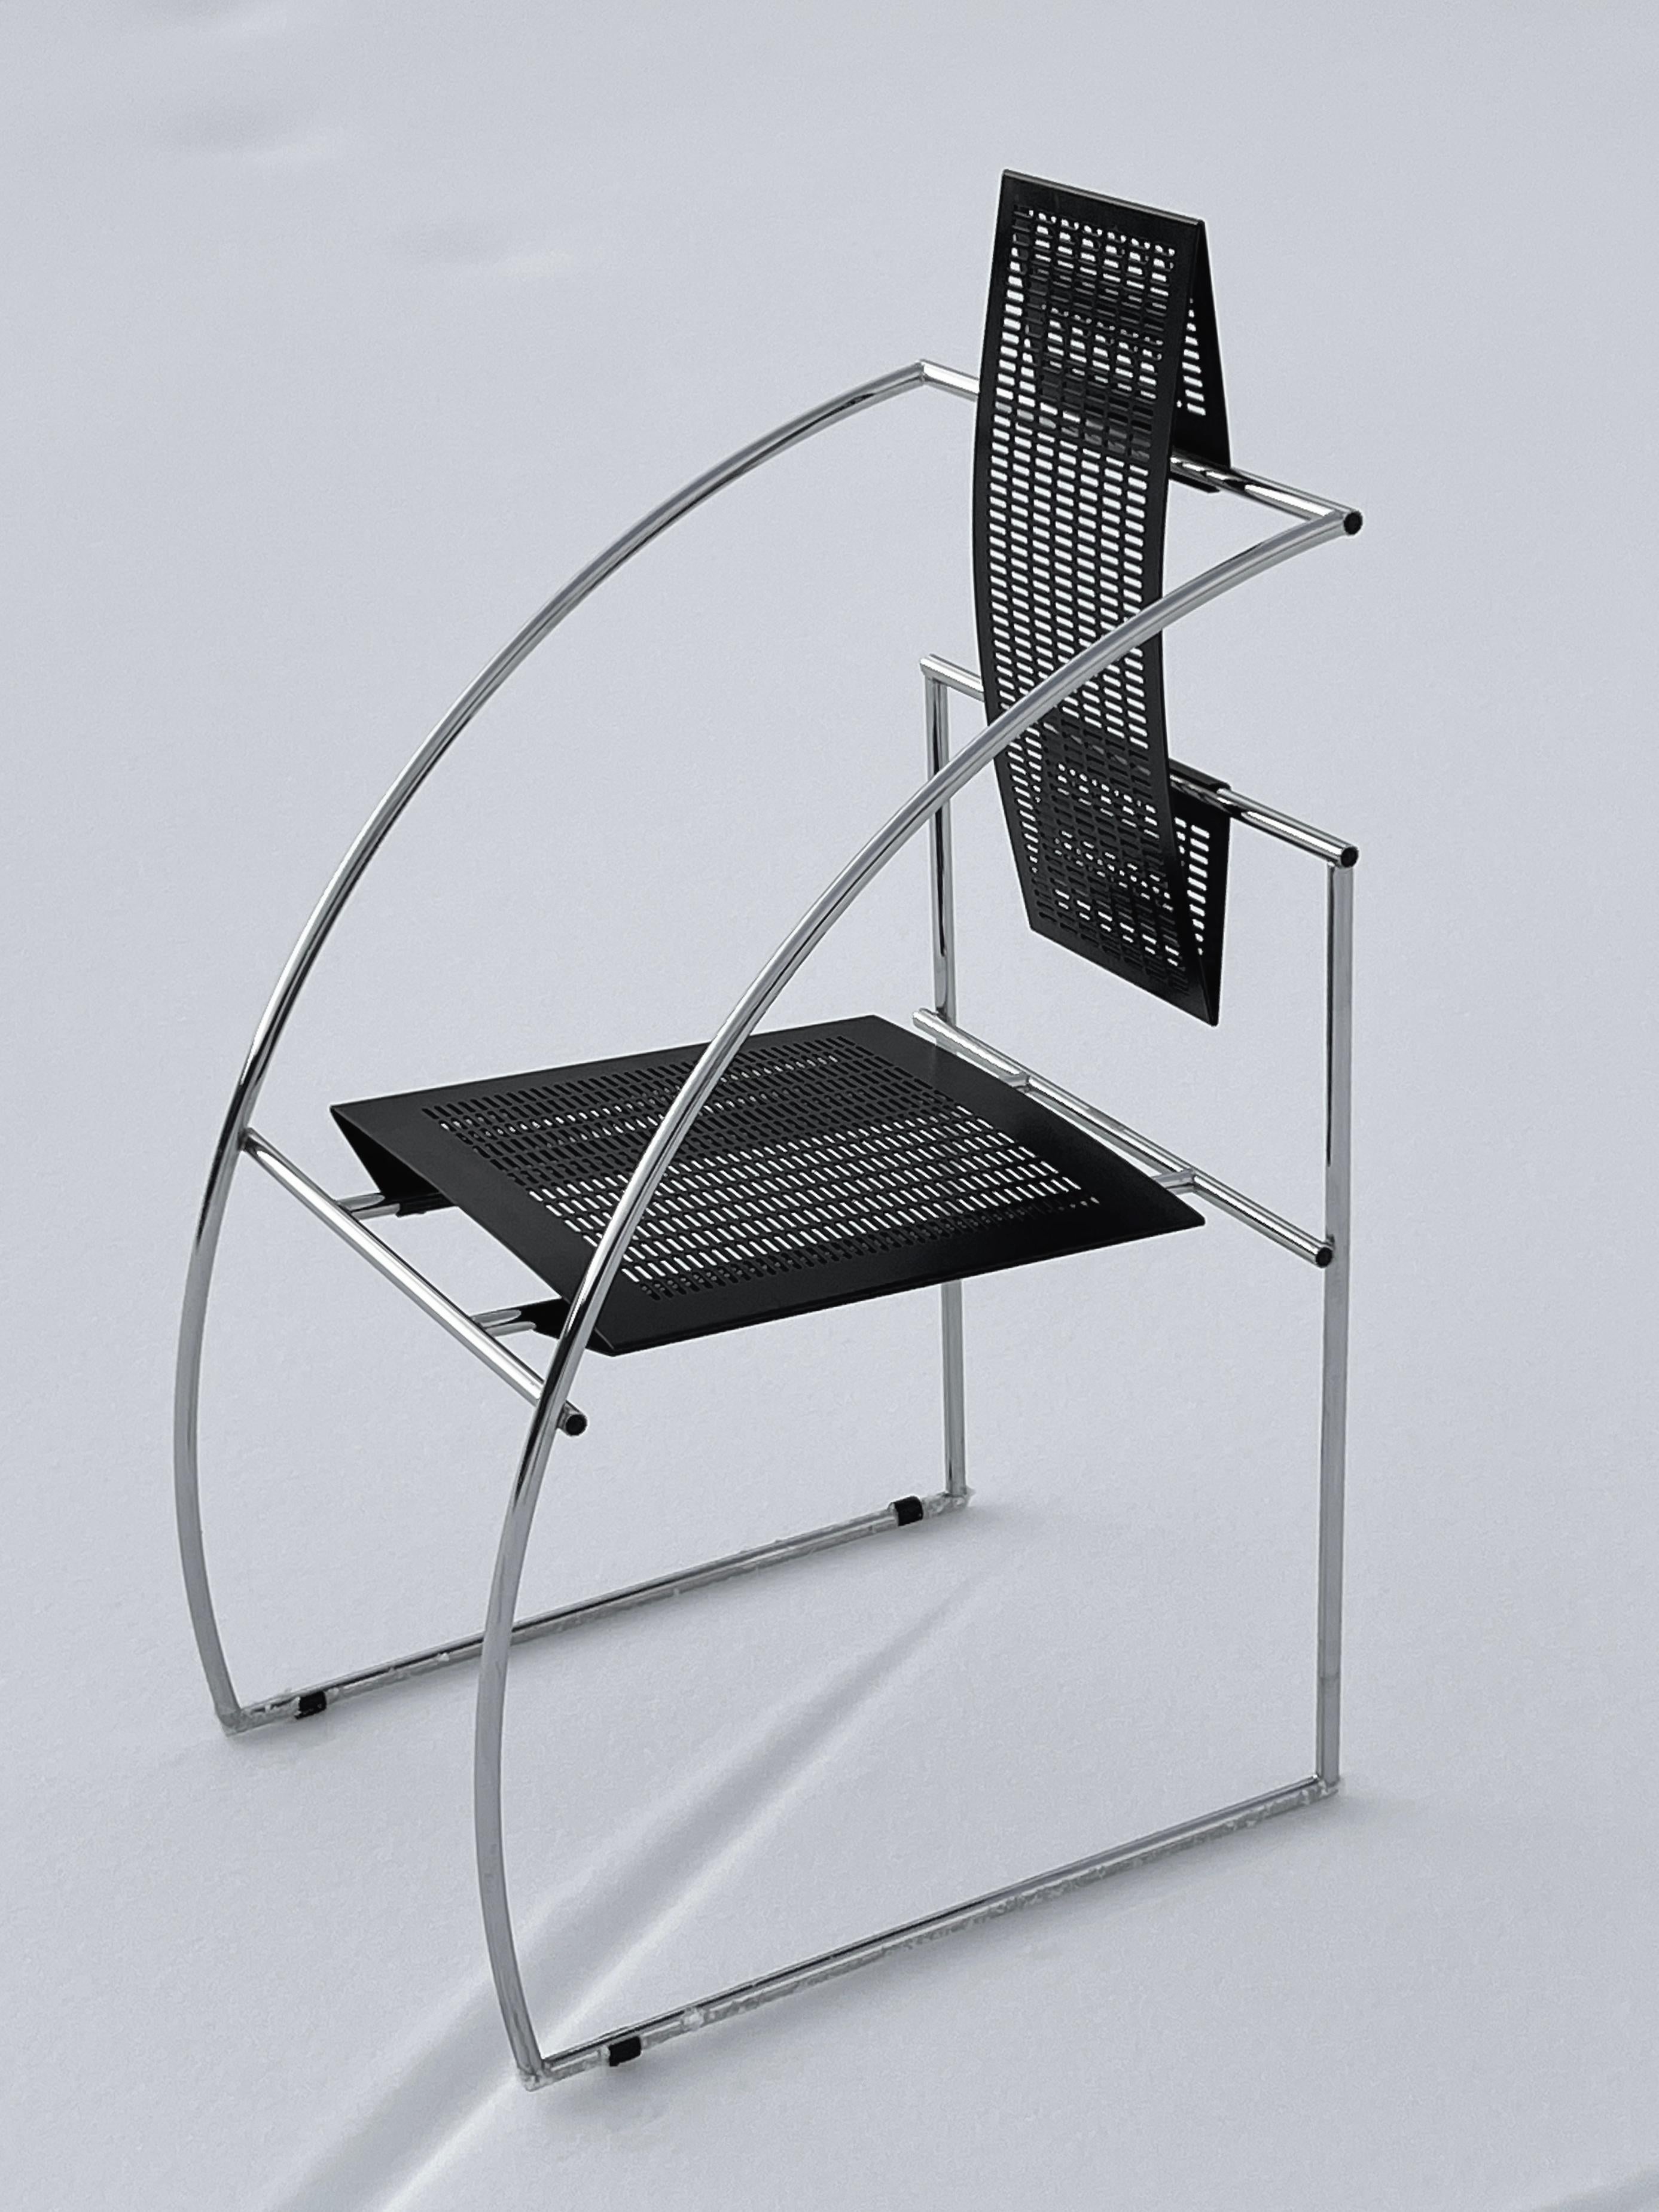 Quinta, a chair with a legacy dating back to its creation in 1985, is not your ordinary seat; it embodies a fusion of comfort and architectural sophistication. Designed under the influence of architectural luminaries like Le Corbusier, Louis Kahn,